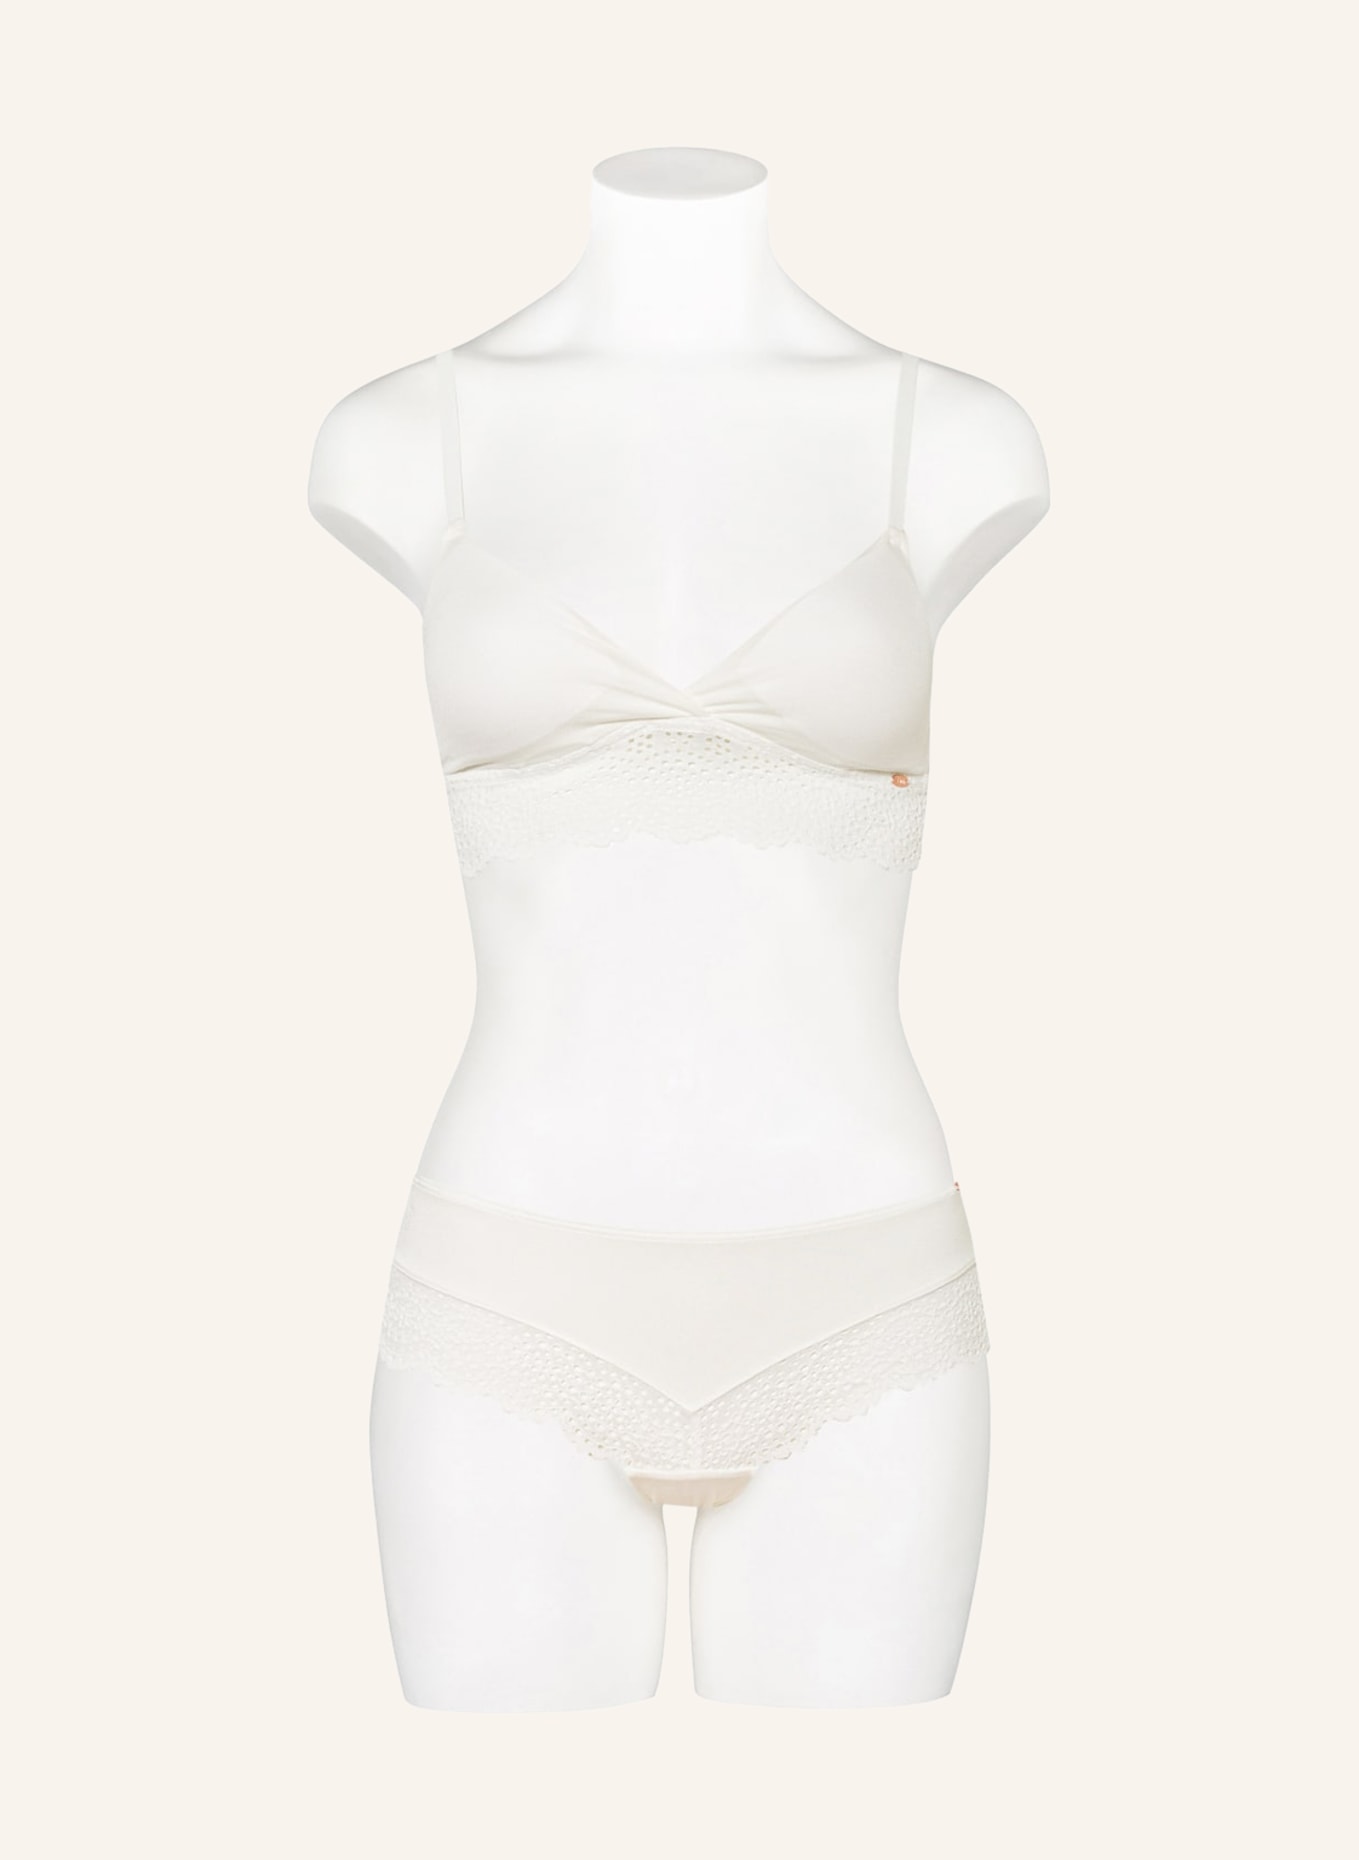 Skiny Triangel-BH EVERY DAY BAMBOO LACE, Farbe: WEISS (Bild 2)